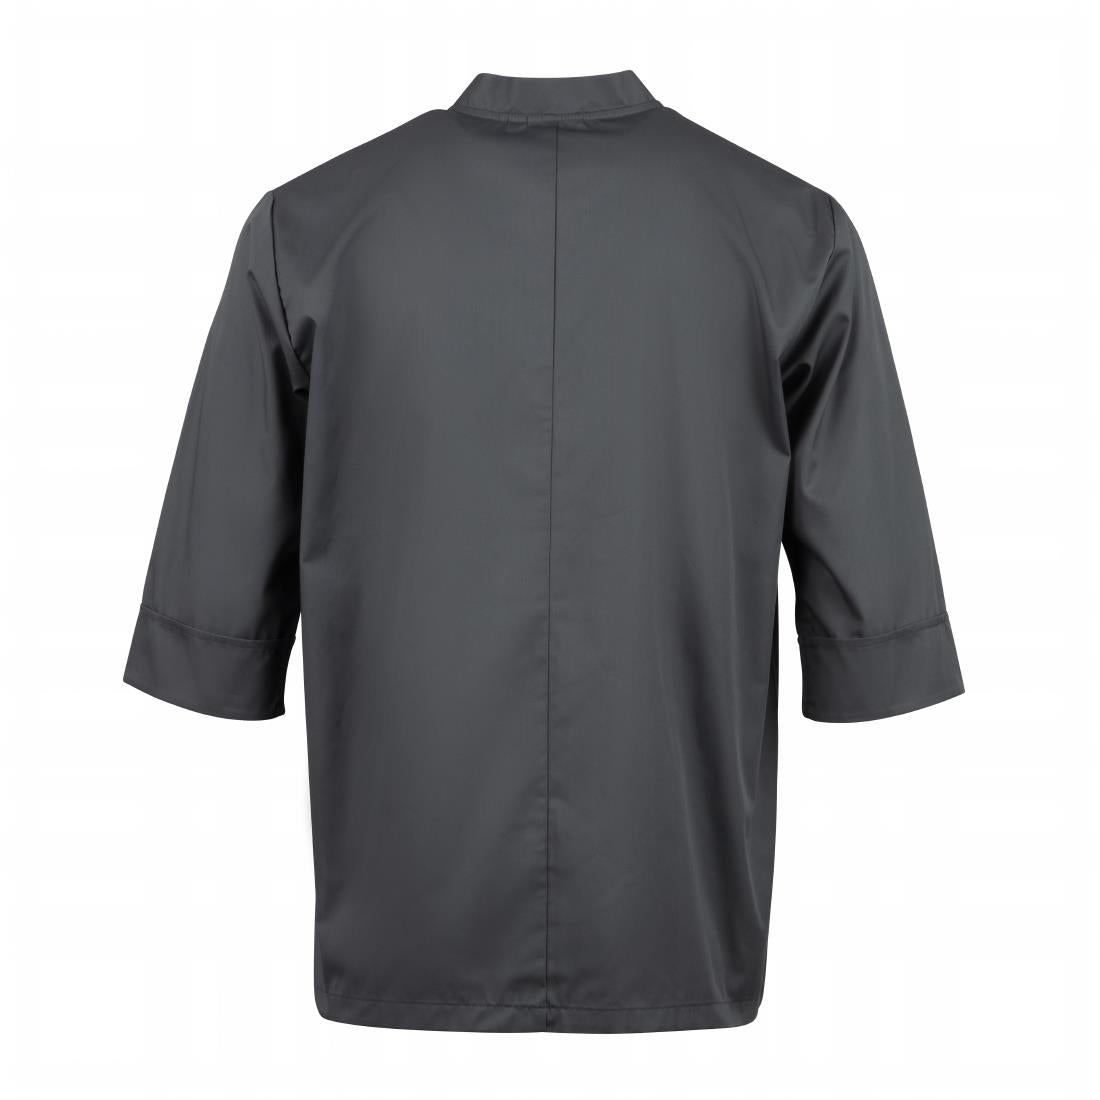 A934-S Chef Works Unisex Chefs Jacket Grey S JD Catering Equipment Solutions Ltd